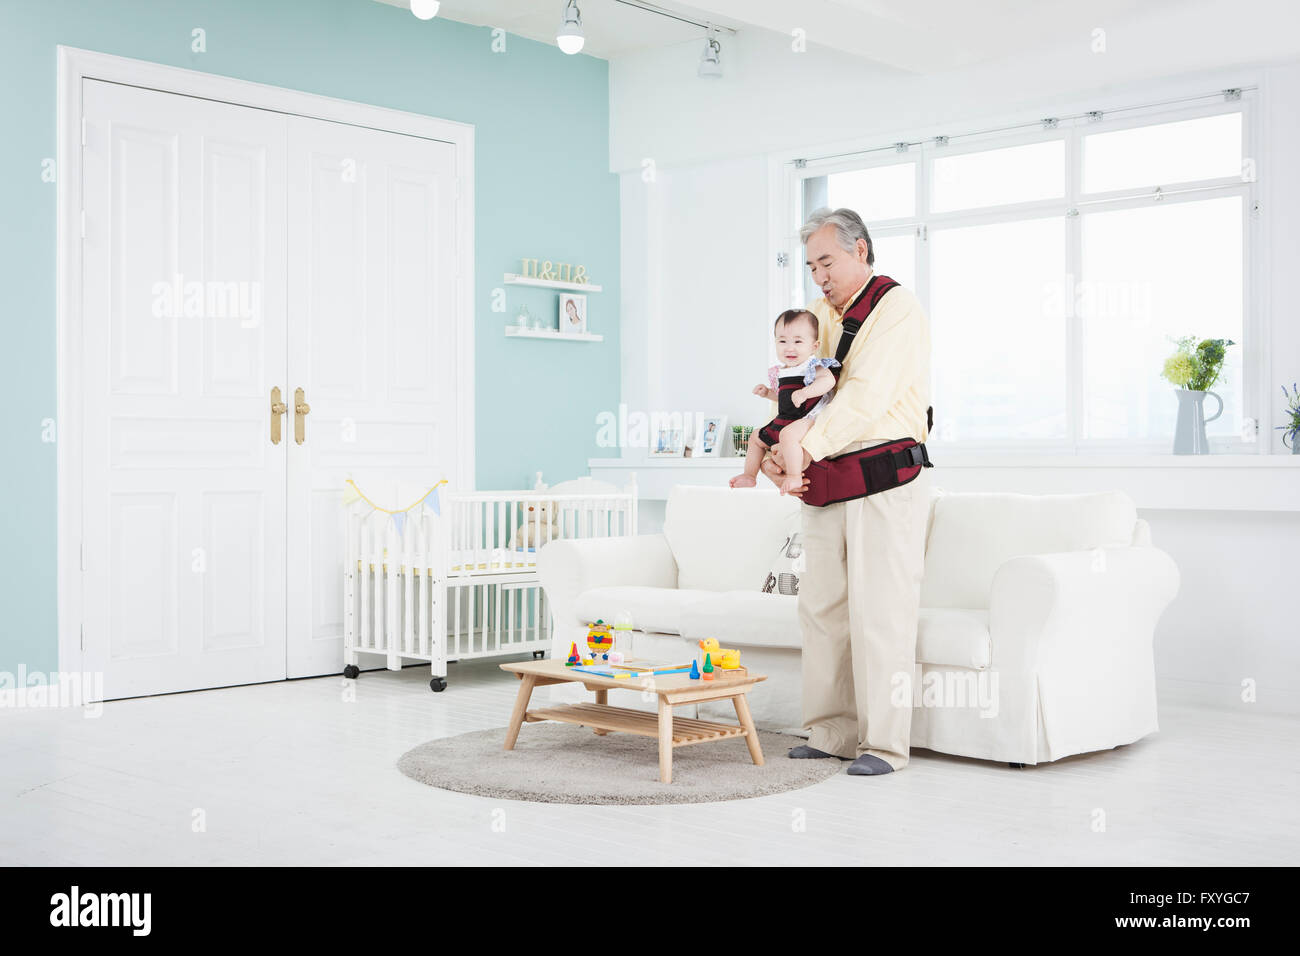 Senior man wearing a baby carrier and holding a baby in it to take care of the baby in a room Stock Photo